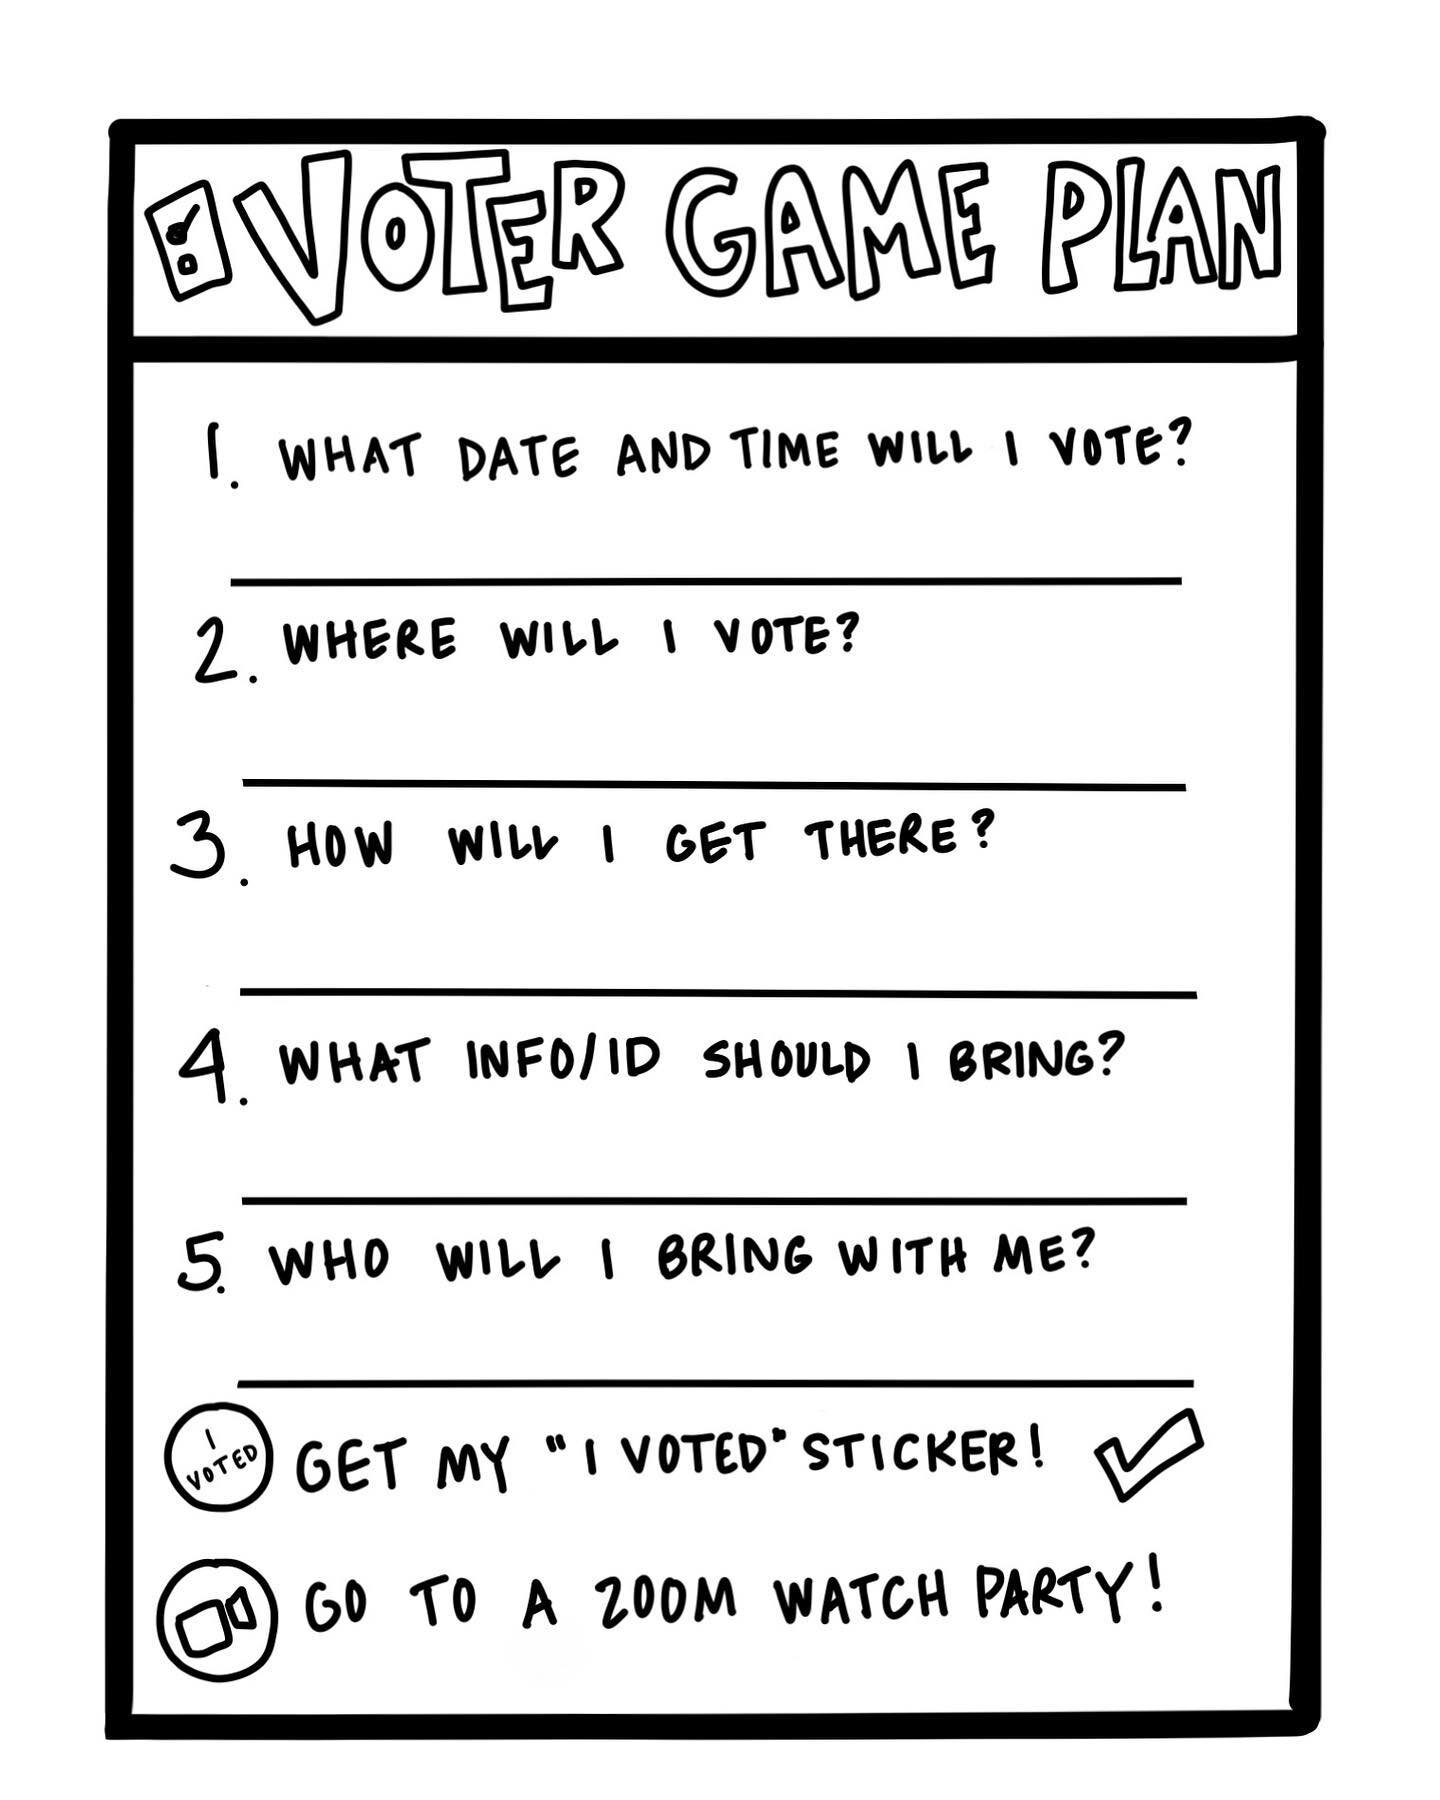 What&rsquo;s your Voter Game Plan? Make a plan and be ready. And make sure your friends and family have a plan, too! Available in postcard form!